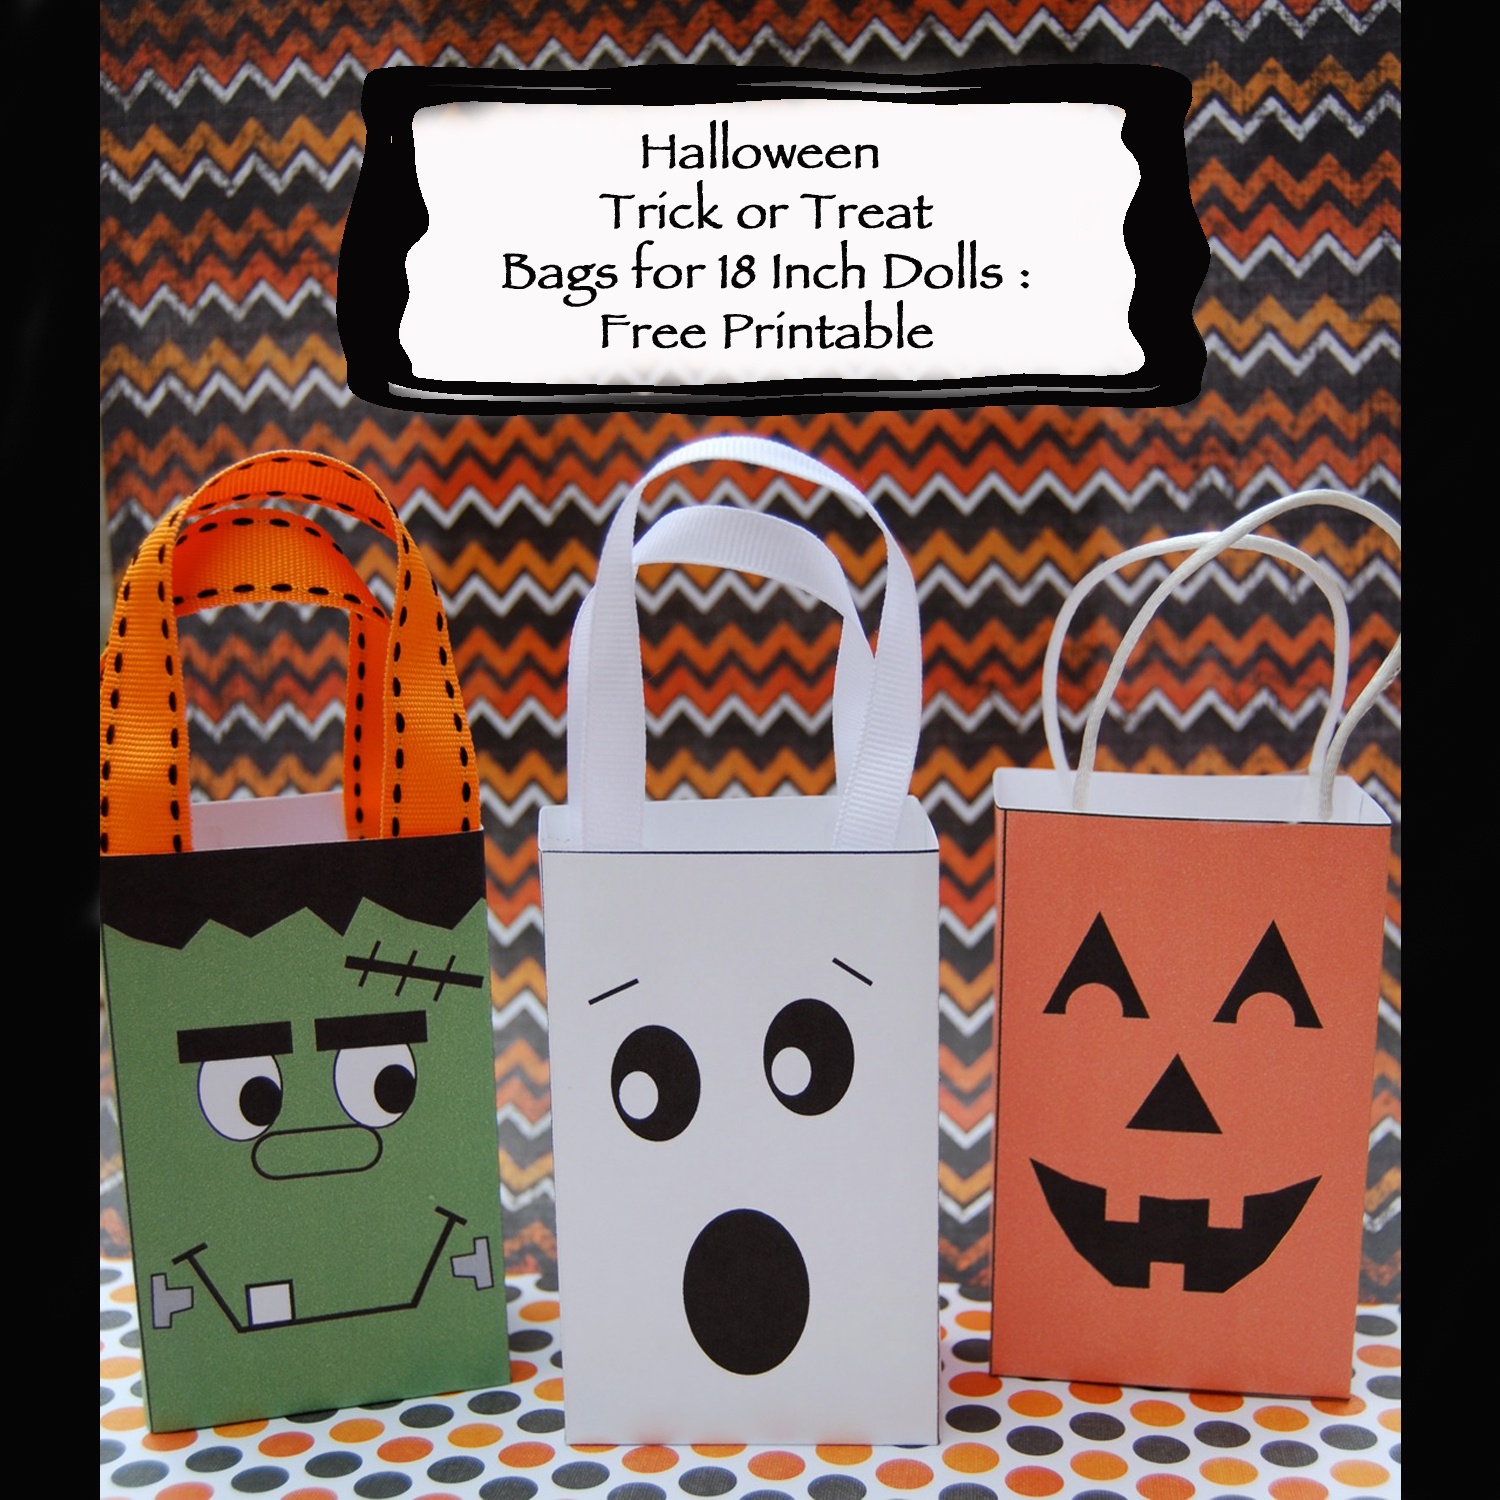 Dream. Dress. Play.: Halloween Trick Or Treat Bags For 18 Inch Dolls - Free Printable Trick Or Treat Bags